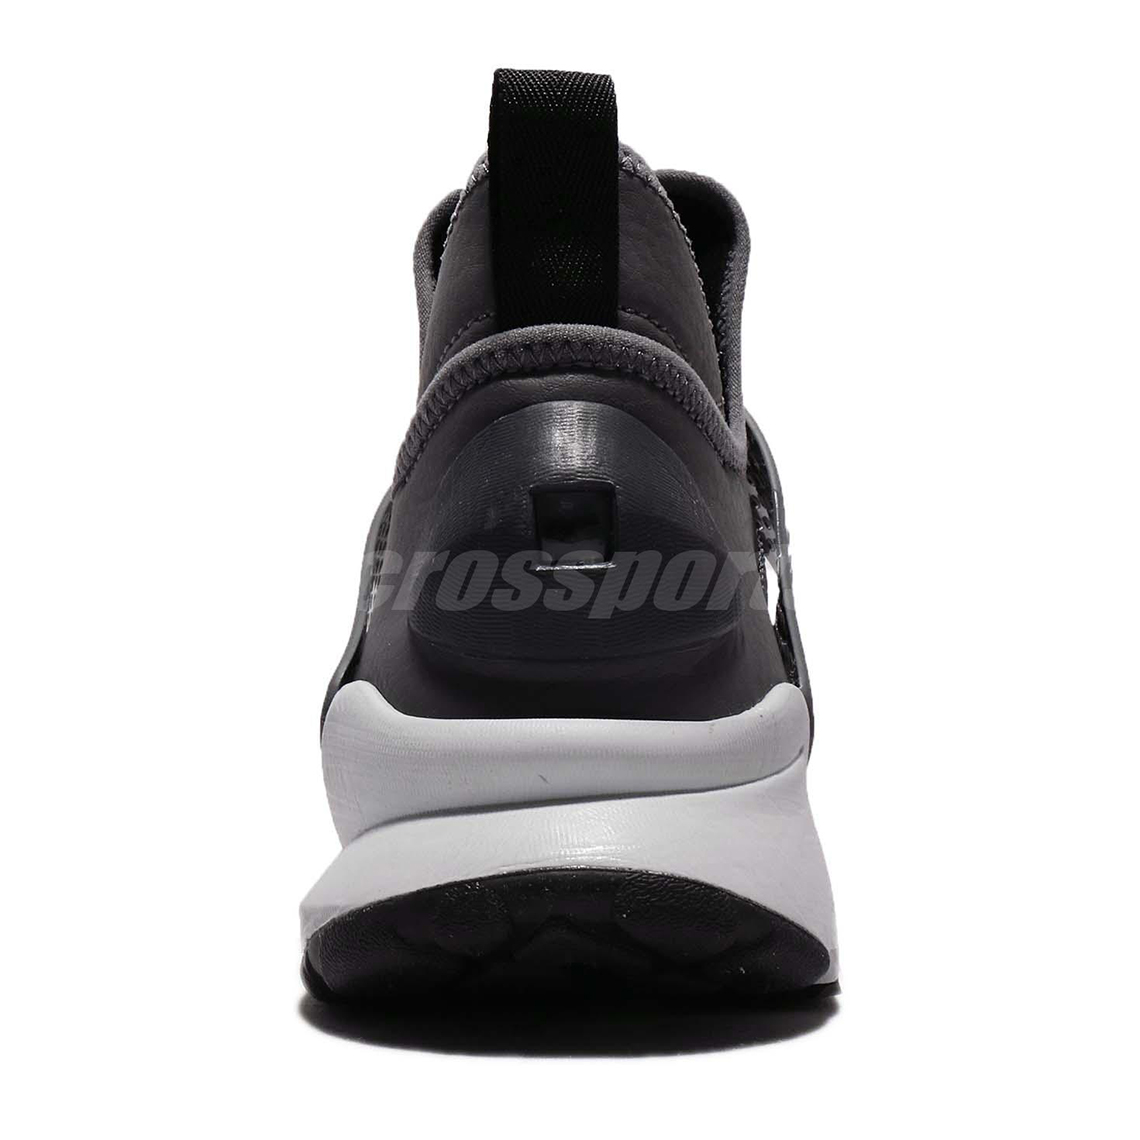 nike-sock-dart-mid-anthracite-924454-003-available-now-5.jpg